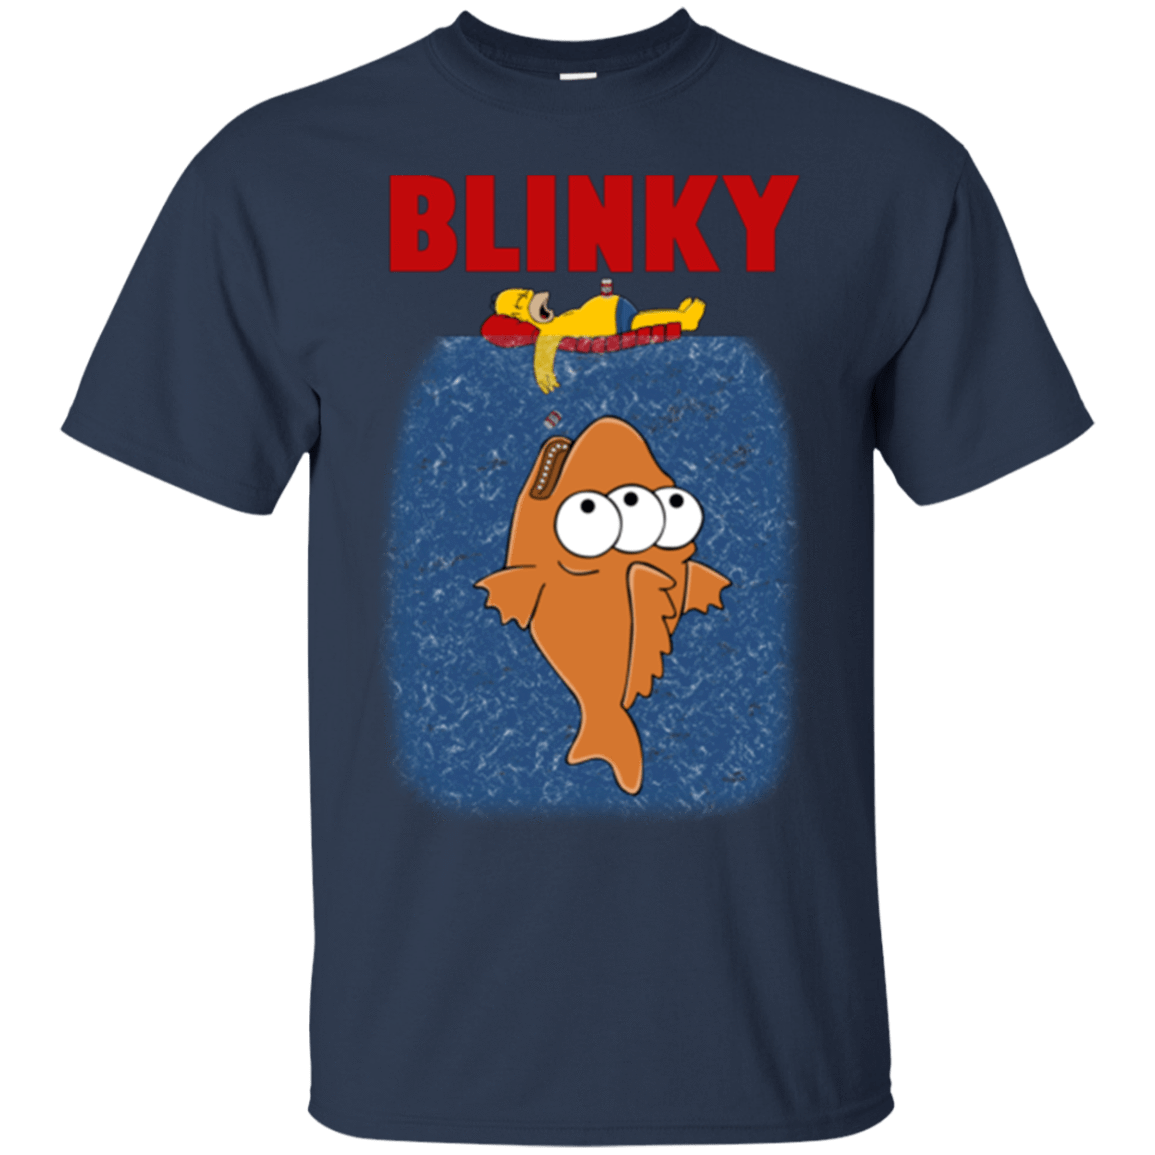 T-Shirts Navy / Small Blinky Jaws T-Shirt